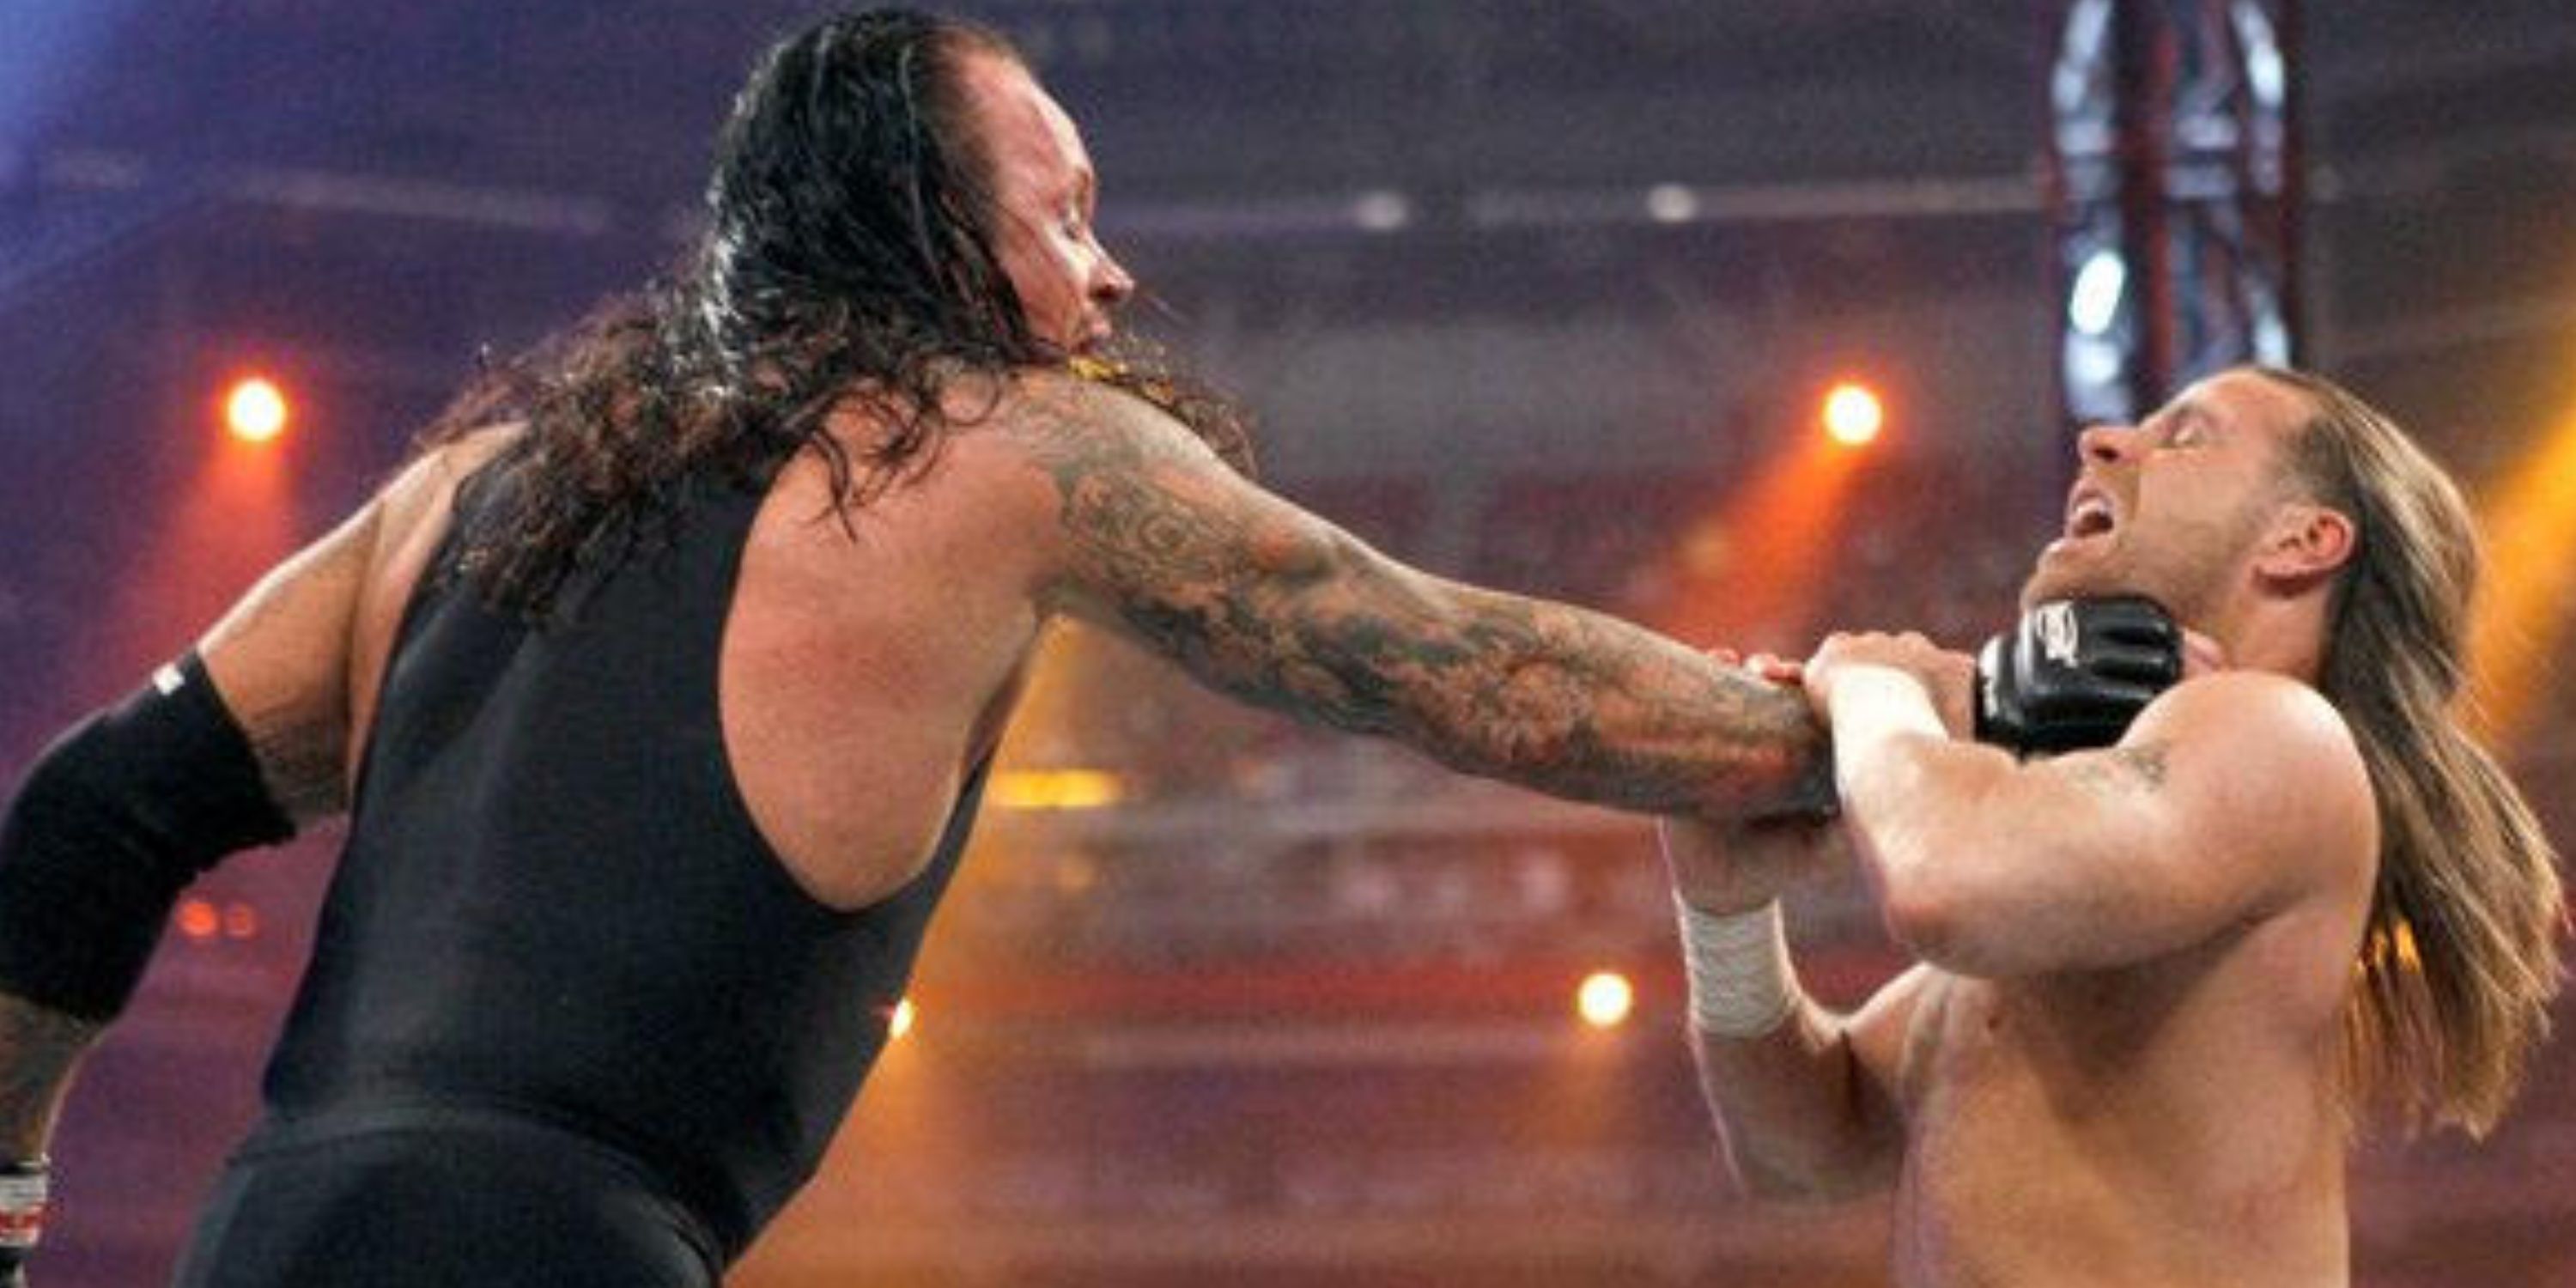 Shawn Michaels and The Undertaker at WrestleMania 26